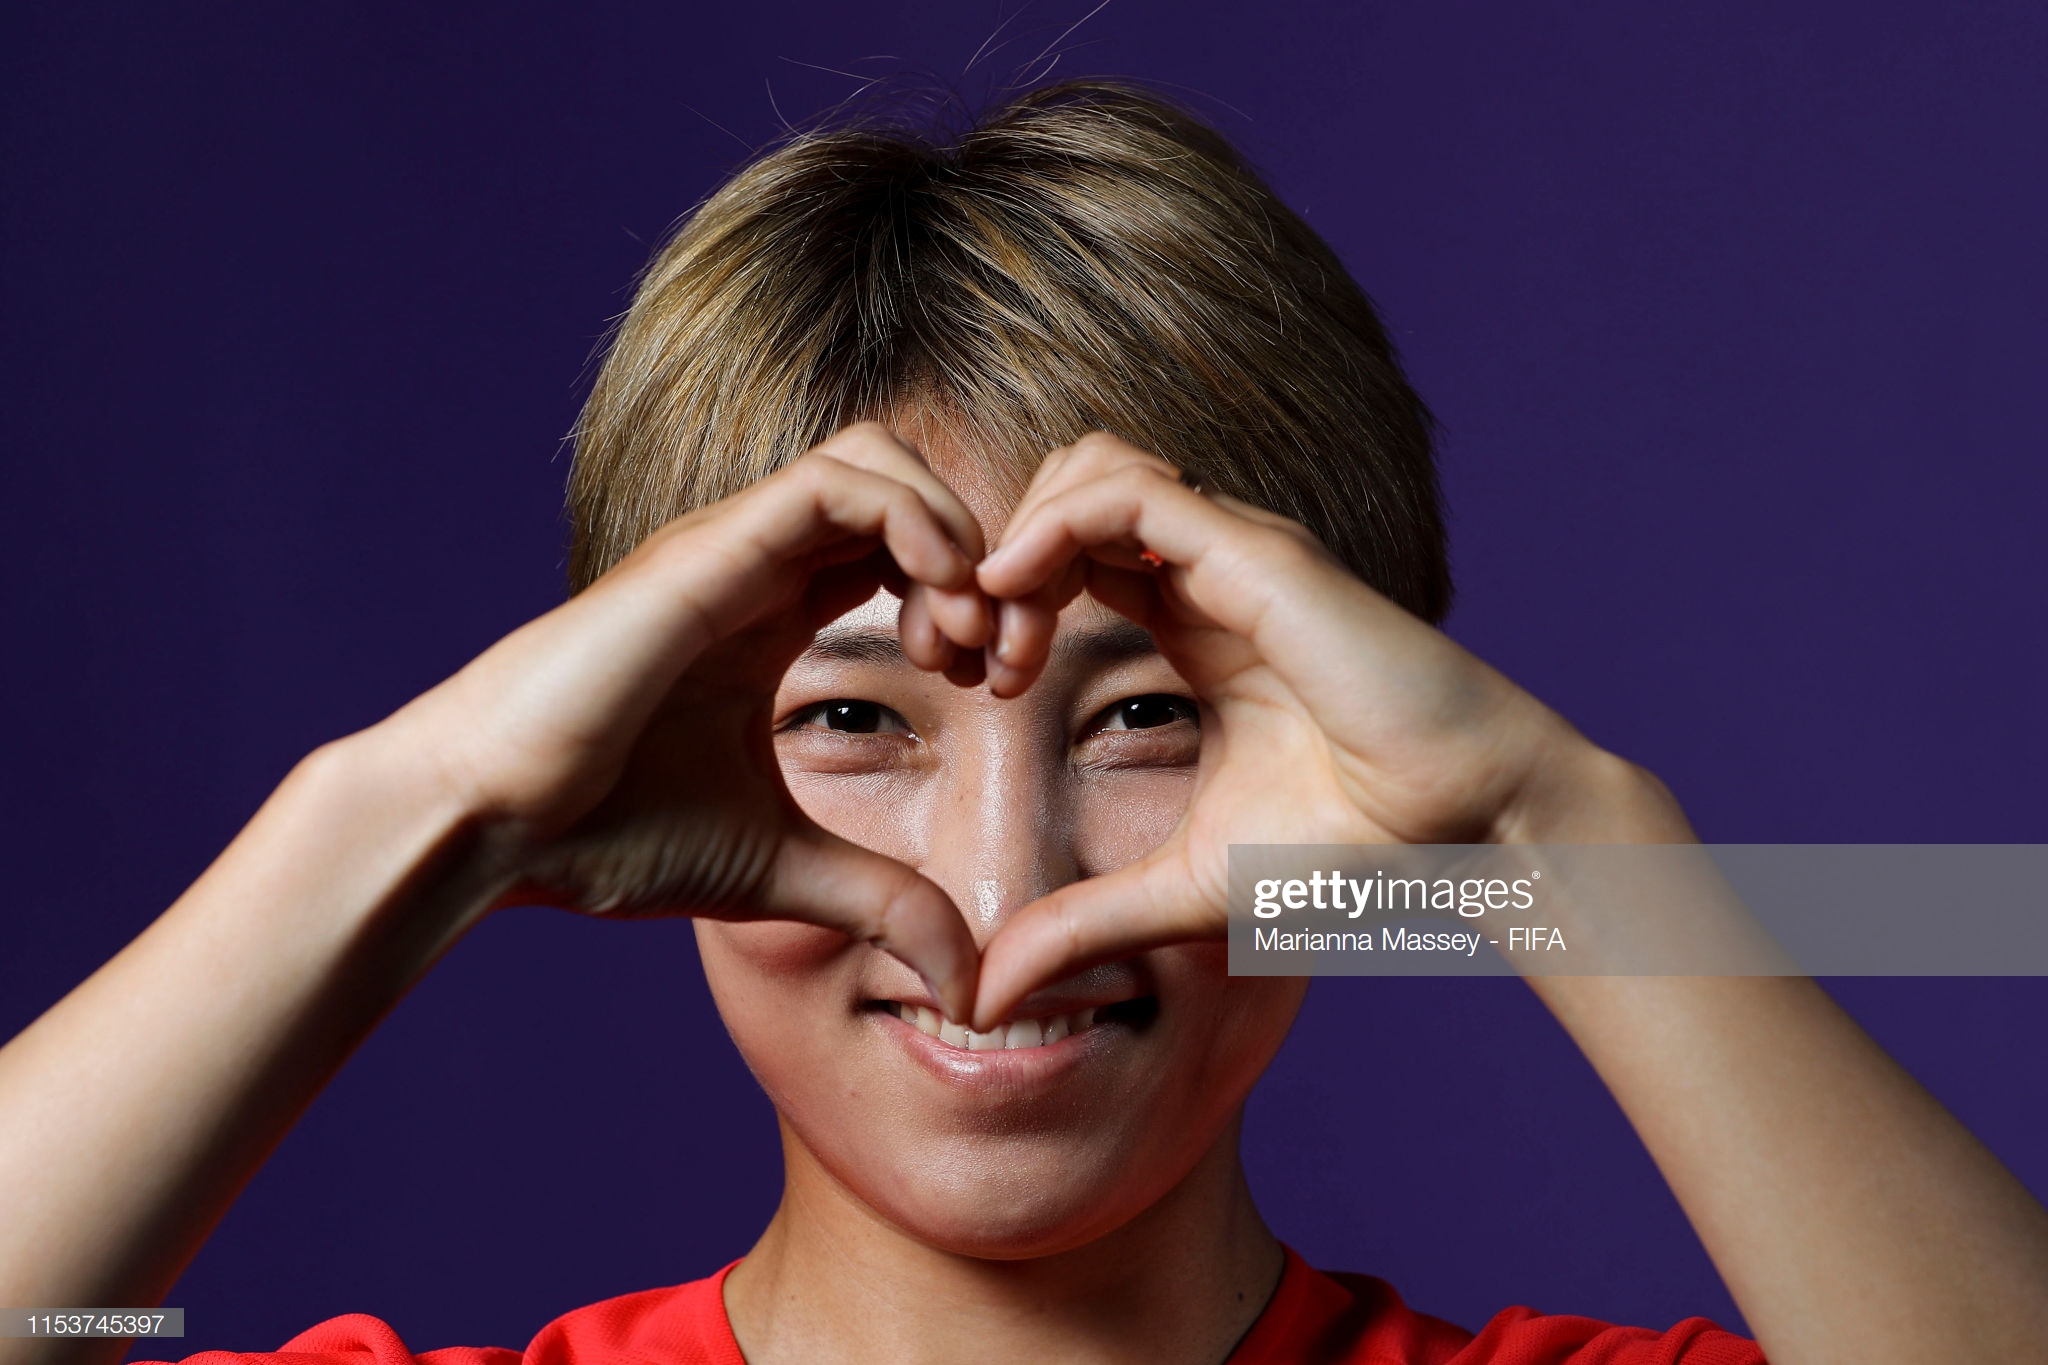 gettyimages-1153745397-2048x2048.jpg